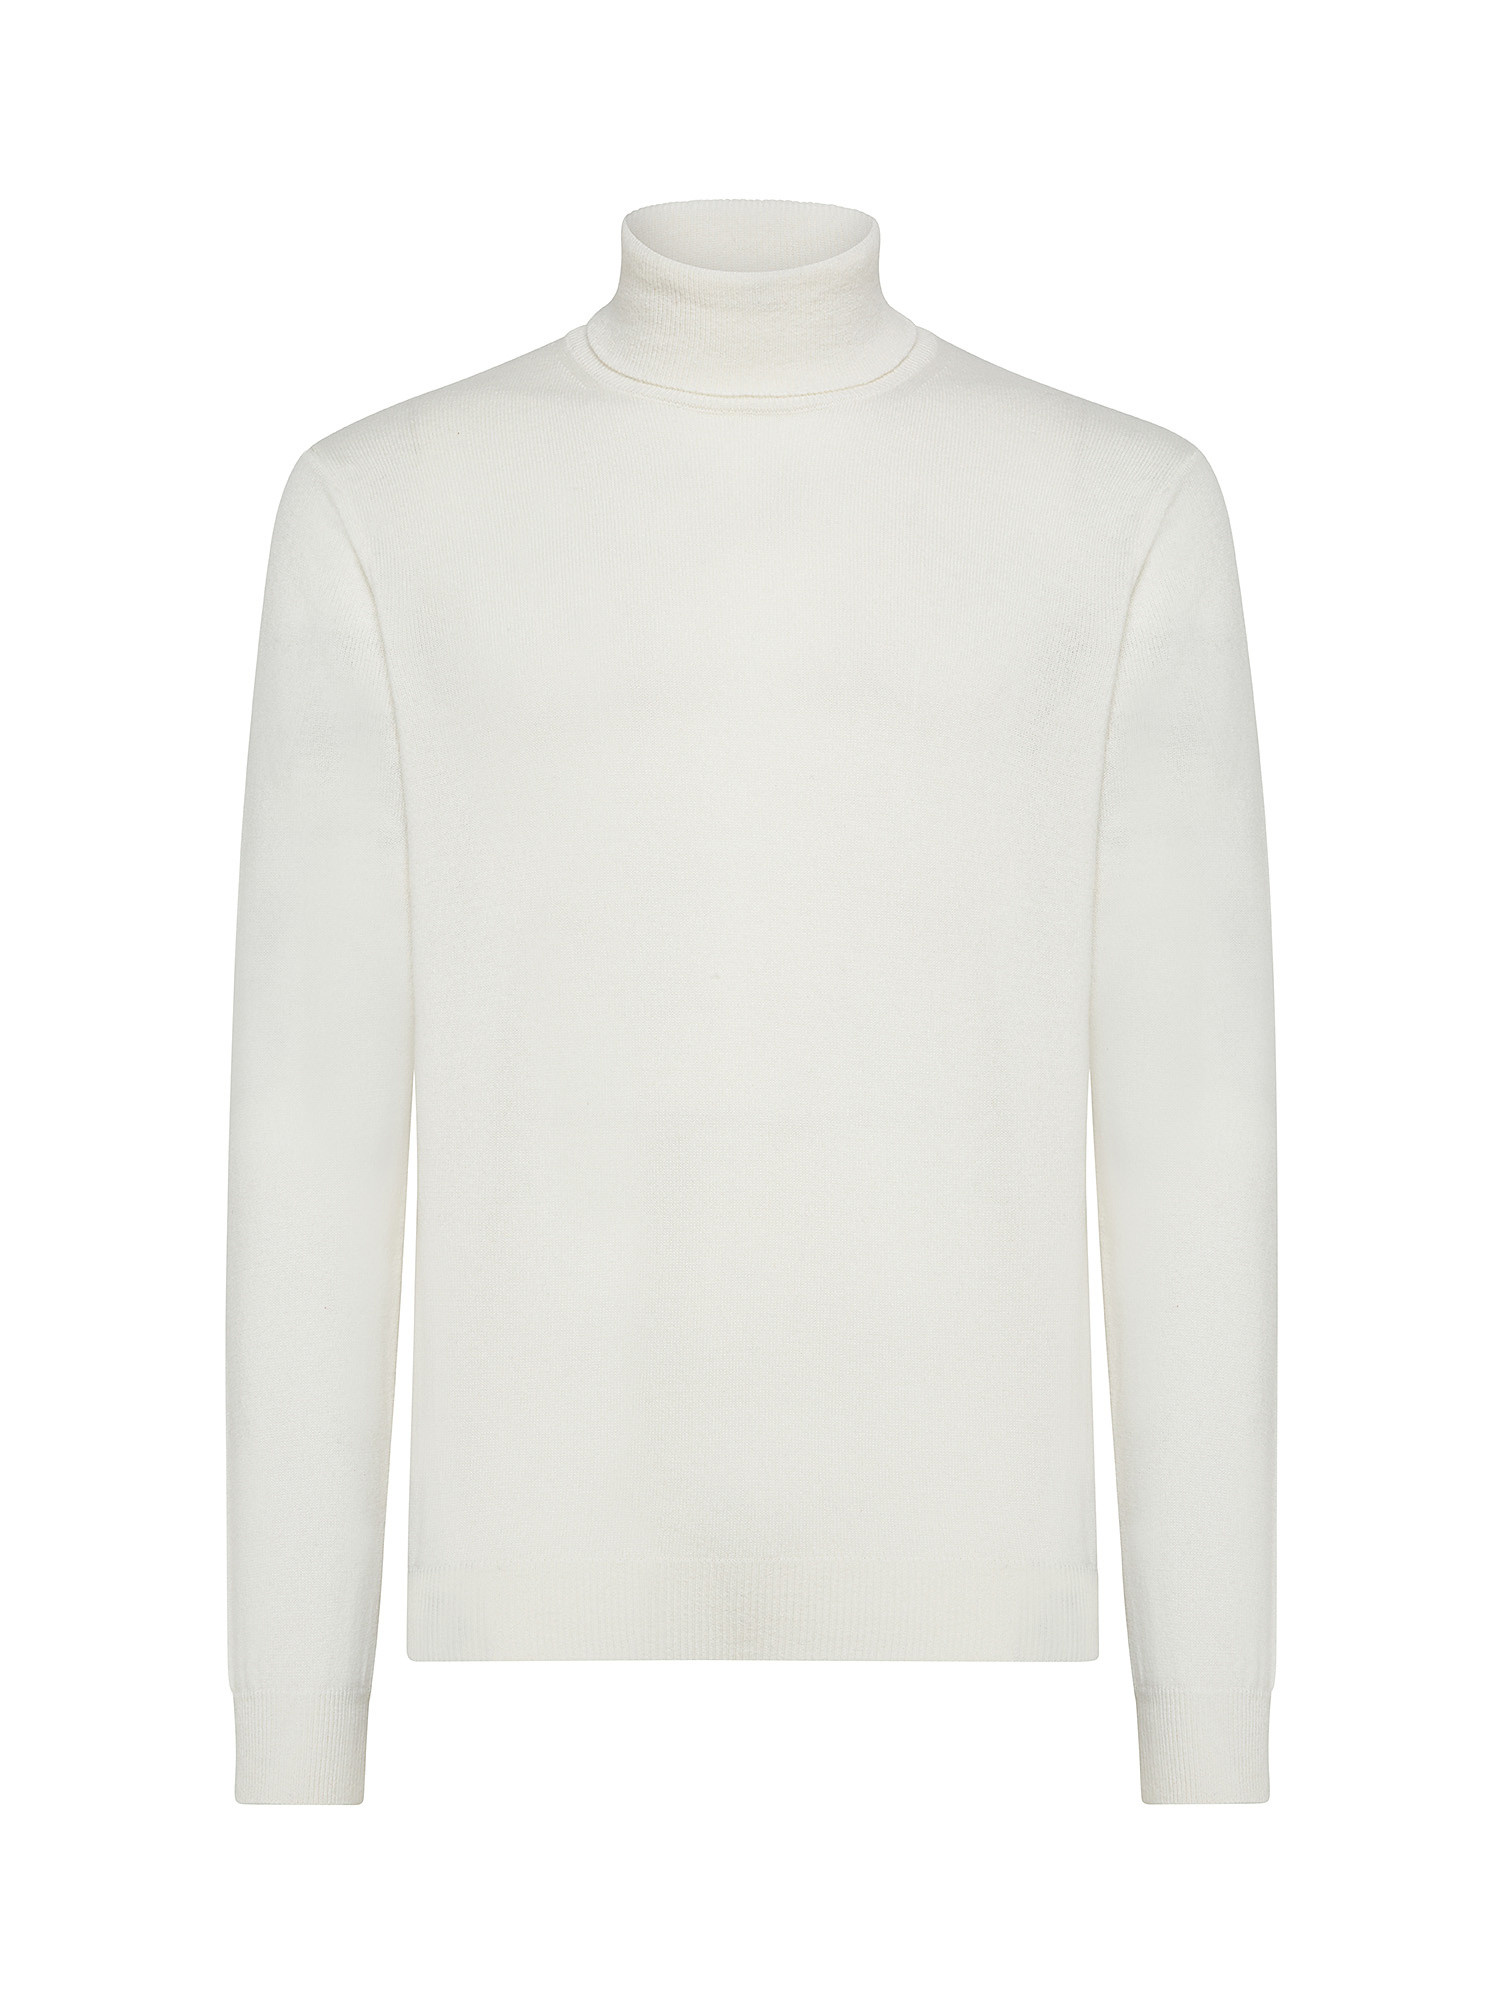 Coin Cashmere - Turtleneck in pure cashmere, White, large image number 0